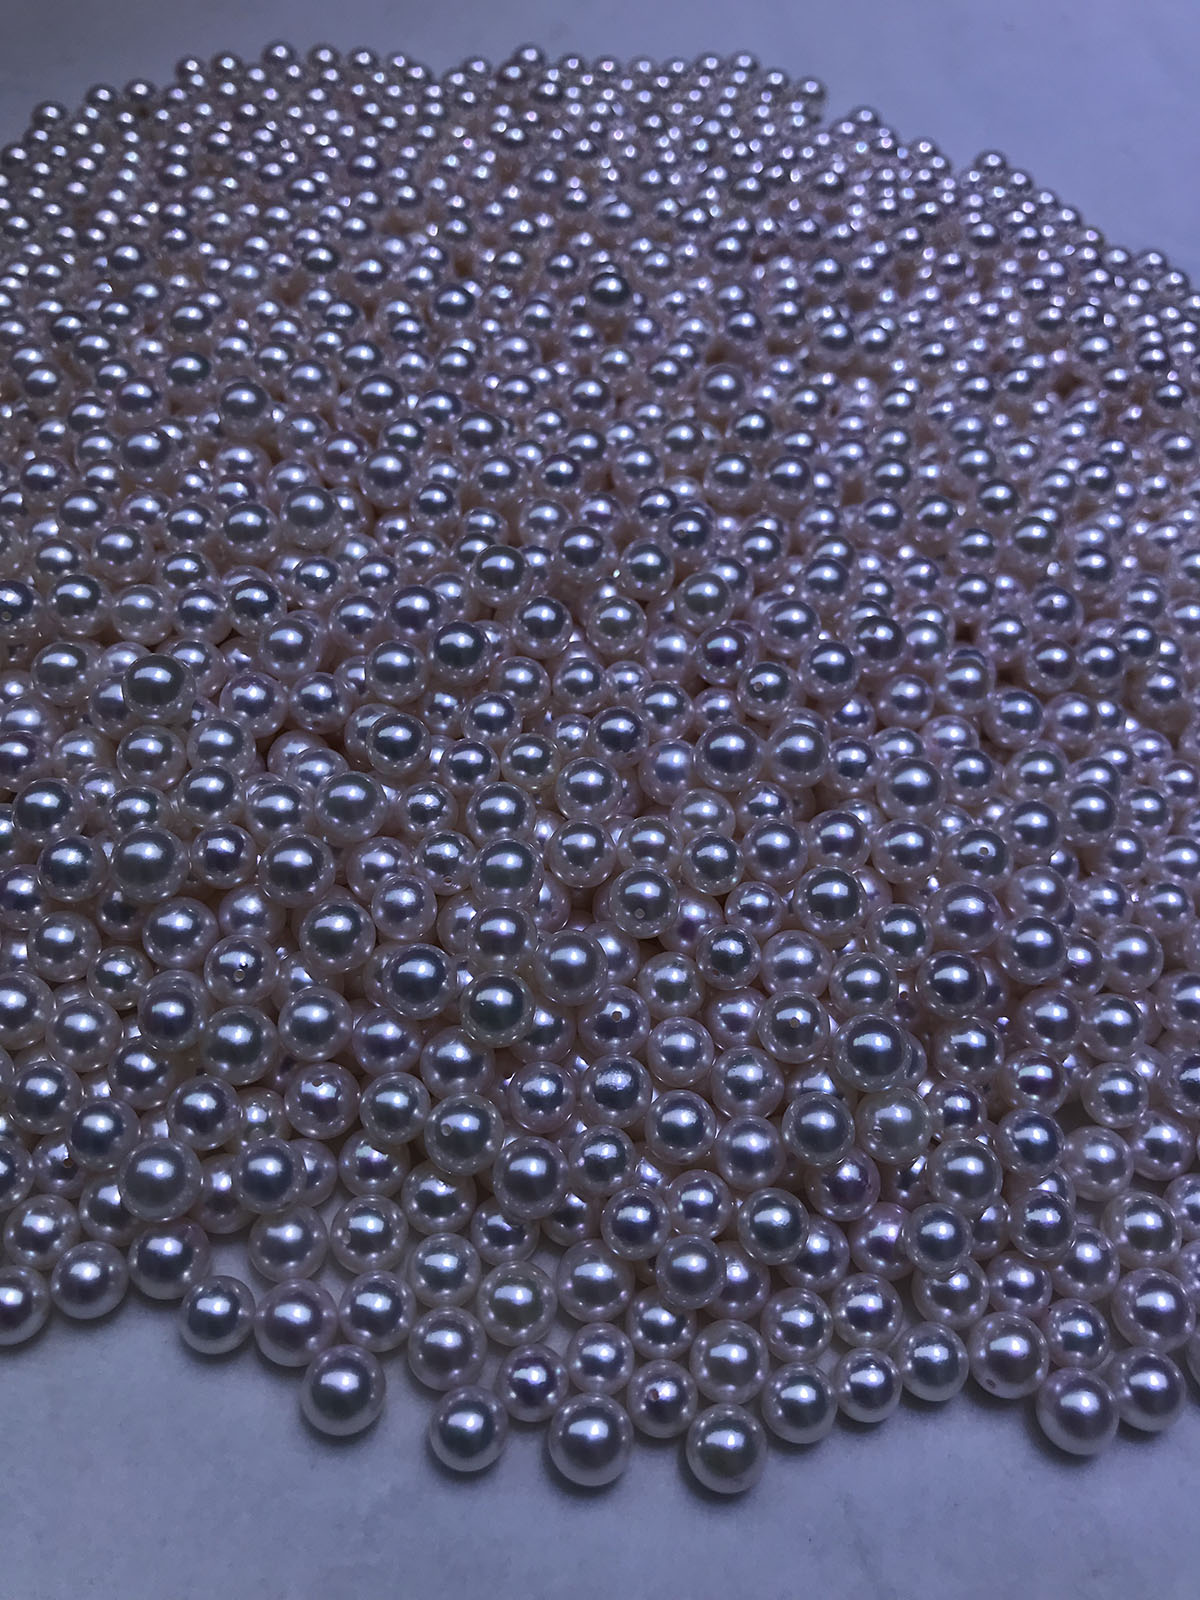 7-7.5 mm high quality AKOYA  pearls AAA perfect round nature loose pearl with half hole, Natural Akoya pearls loose freshwater pearls with Wholesale Prices